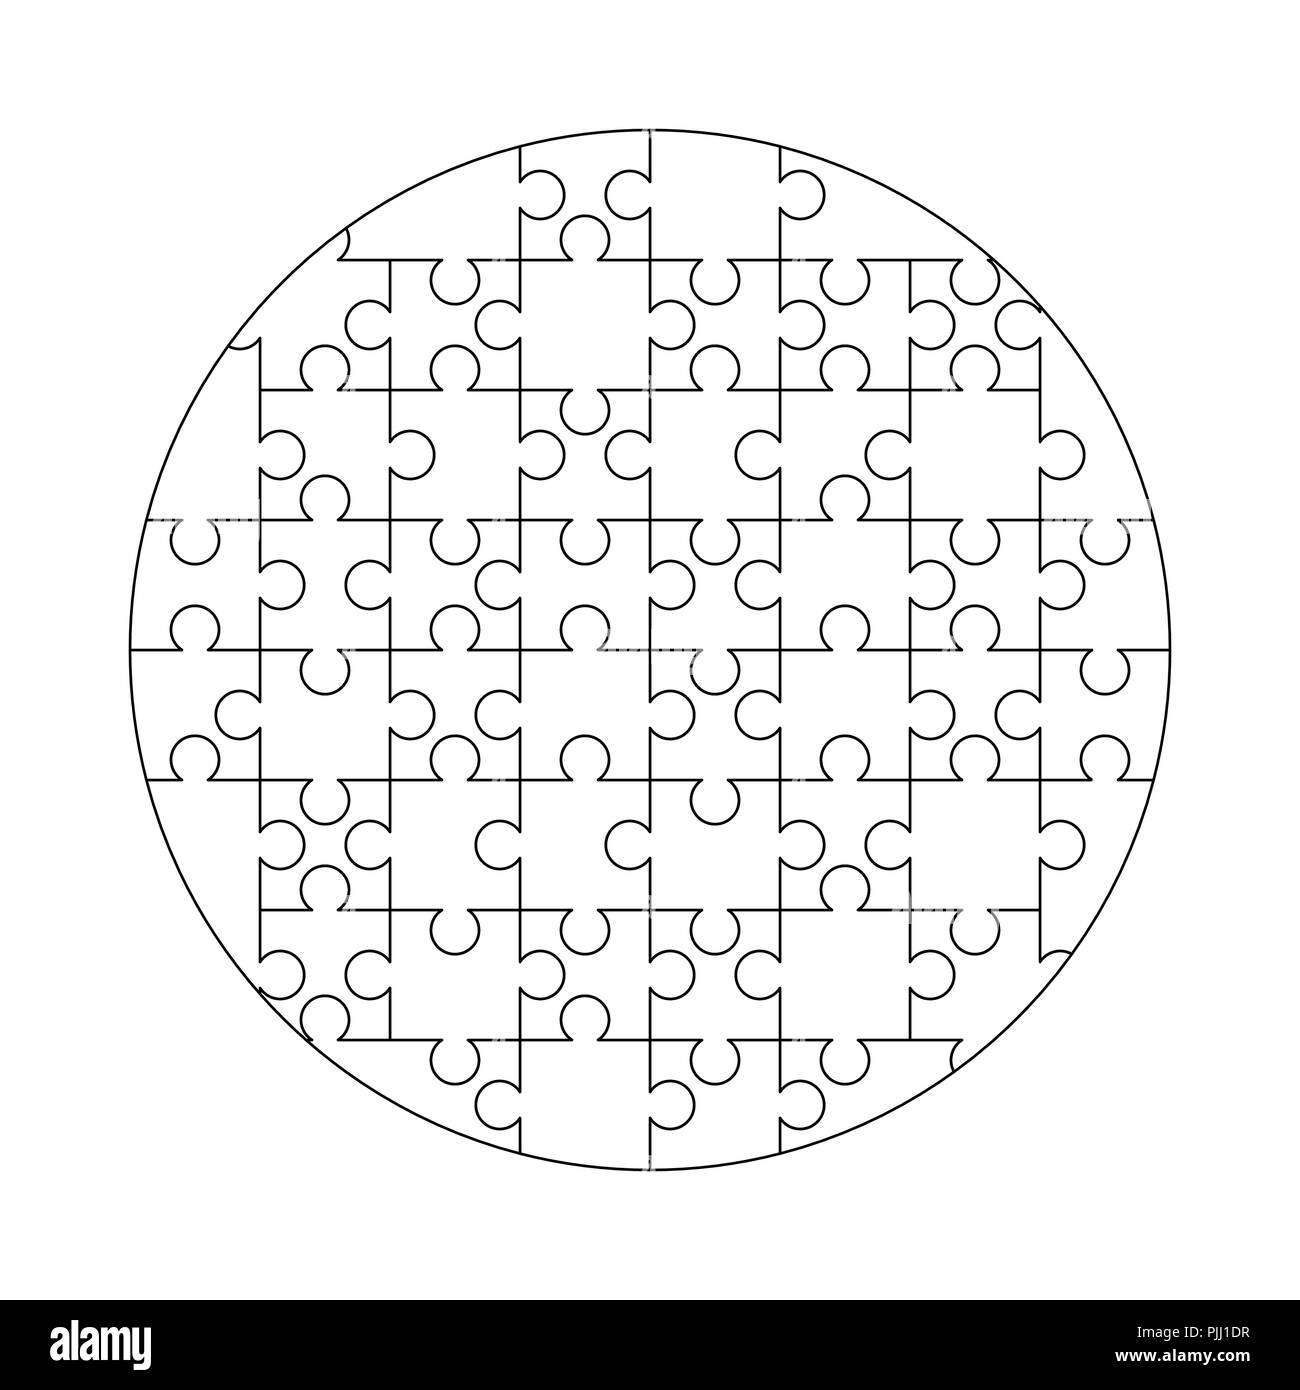 54 white puzzles pieces arranged in a rectangle shape jigsaw puzzle template ready for print cutting guidelines isolated on white stock vector image art alamy